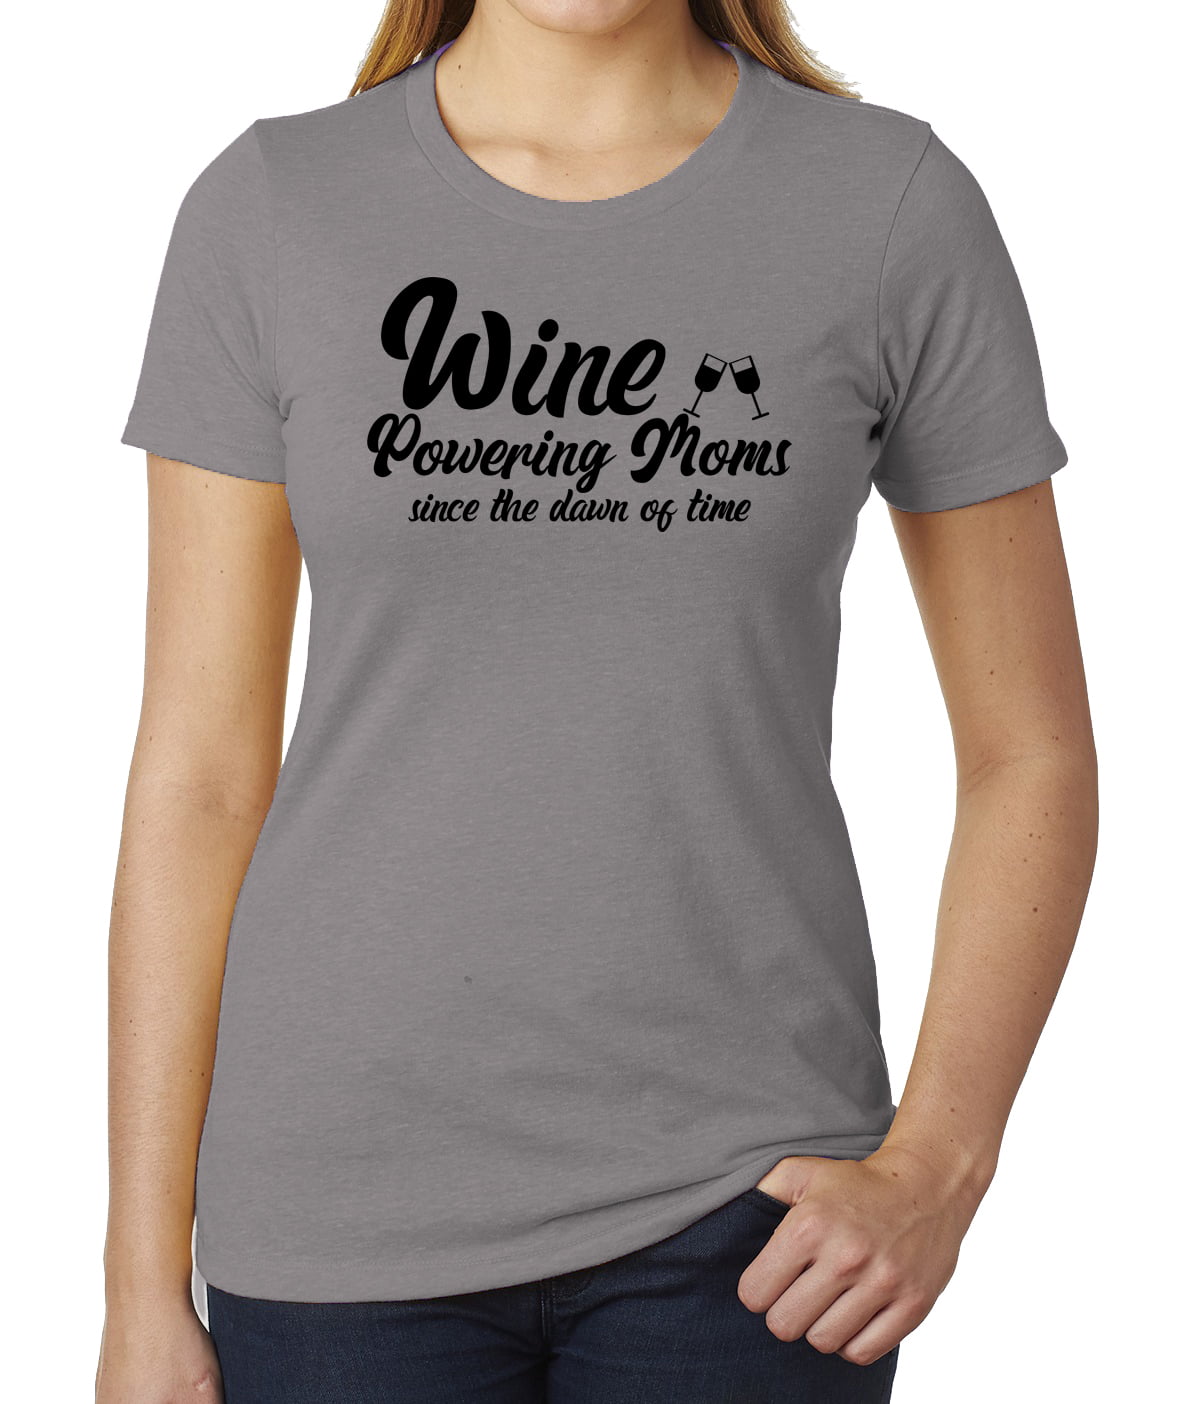 Wine Powering Moms, Funny Mom shirts, Woman's Graphic T-shirts - Heather  Grey MH200WMOM S28 3XL 